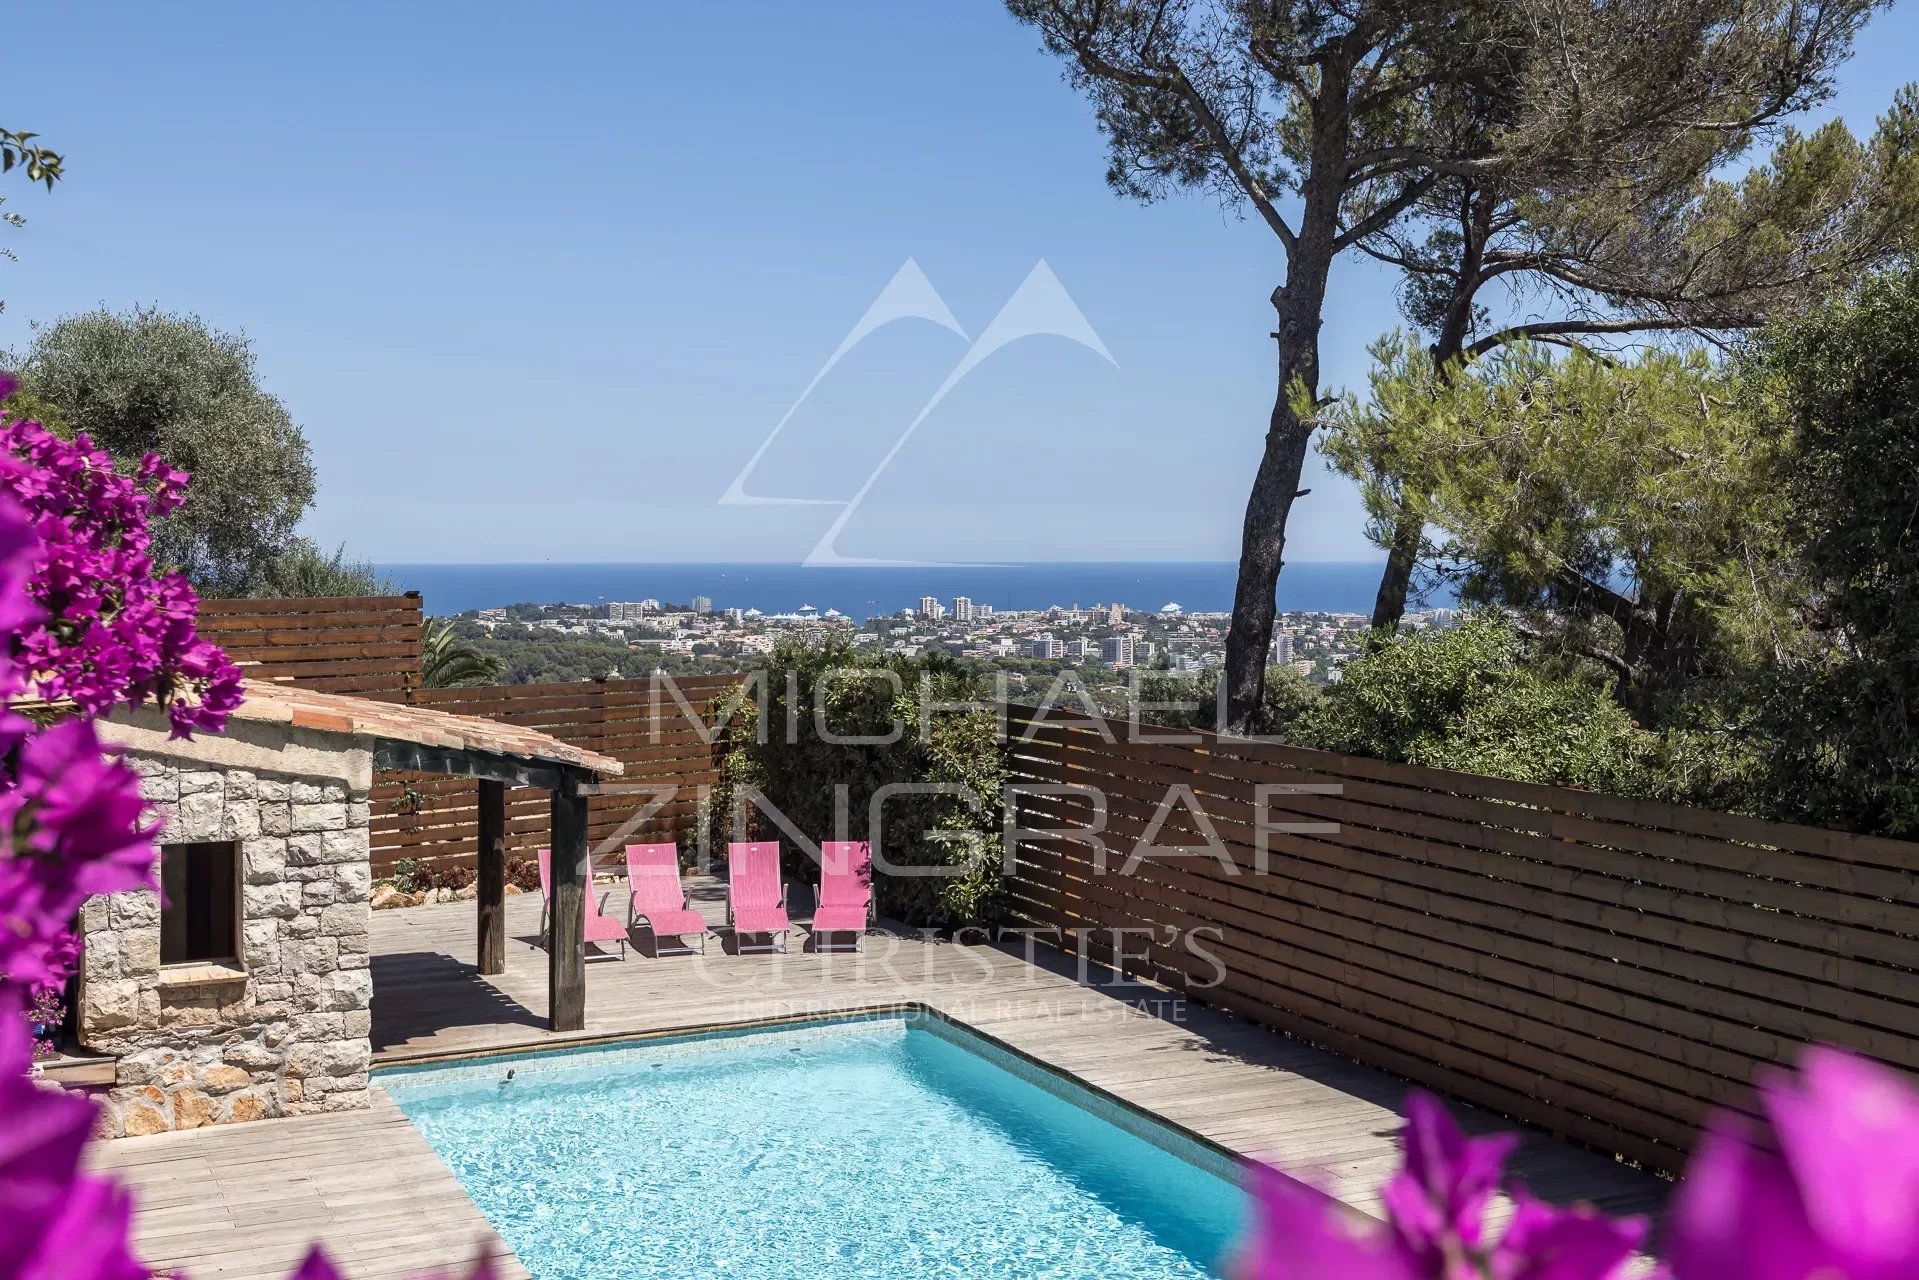 Sole Agent - Close to Cannes - Panoramic sea view